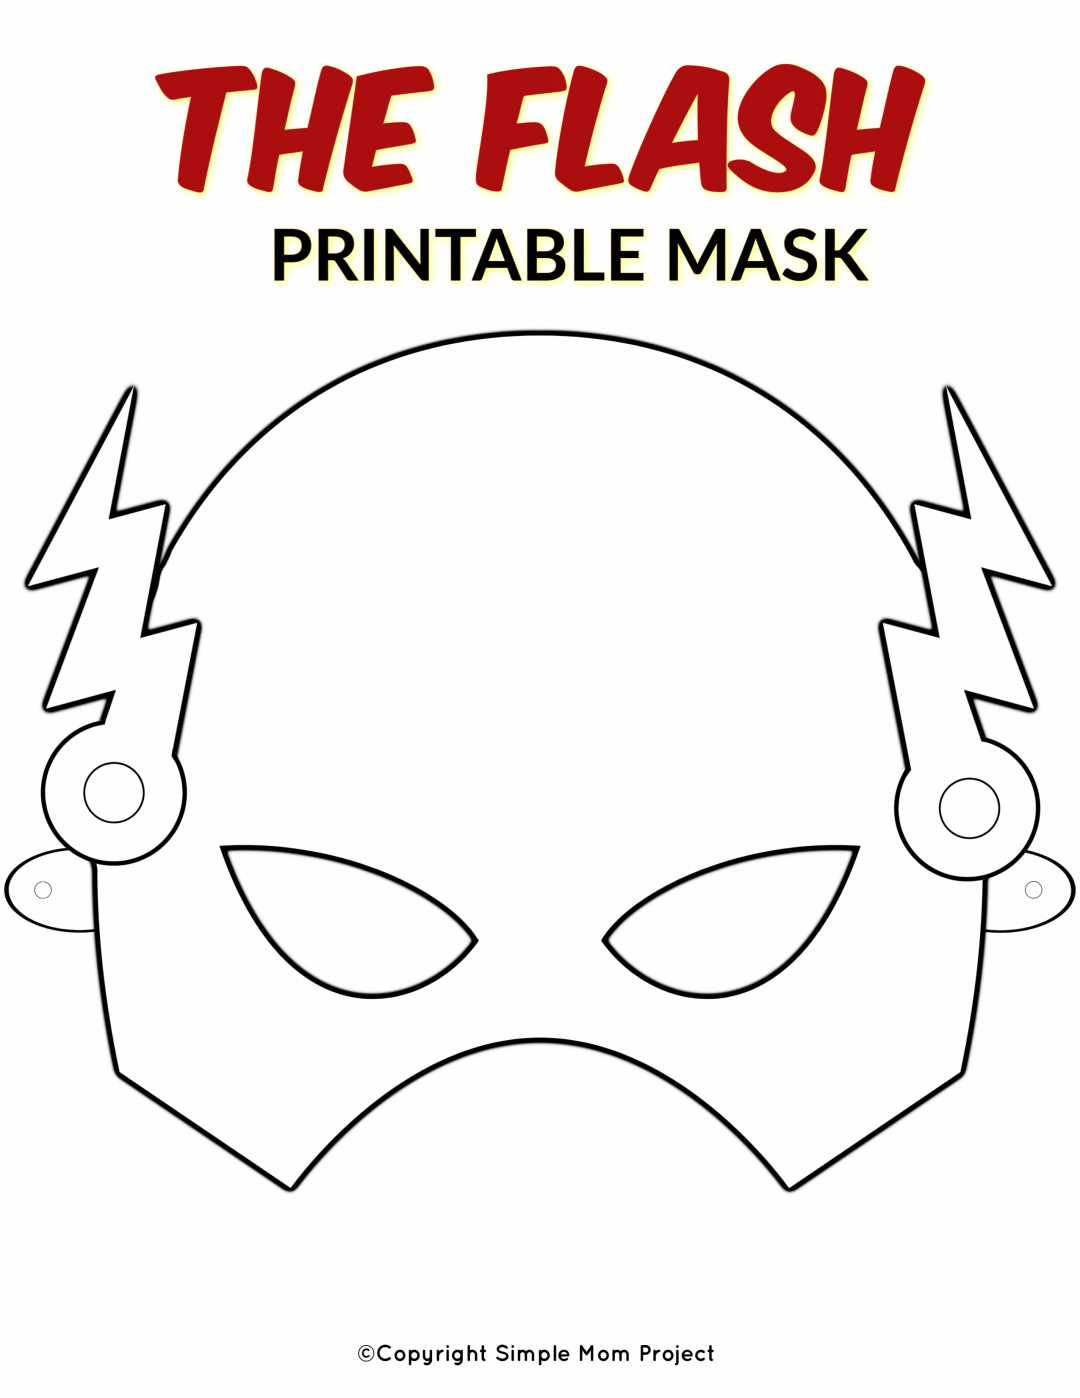 superhero-masks-coloring-pages-coloring-home